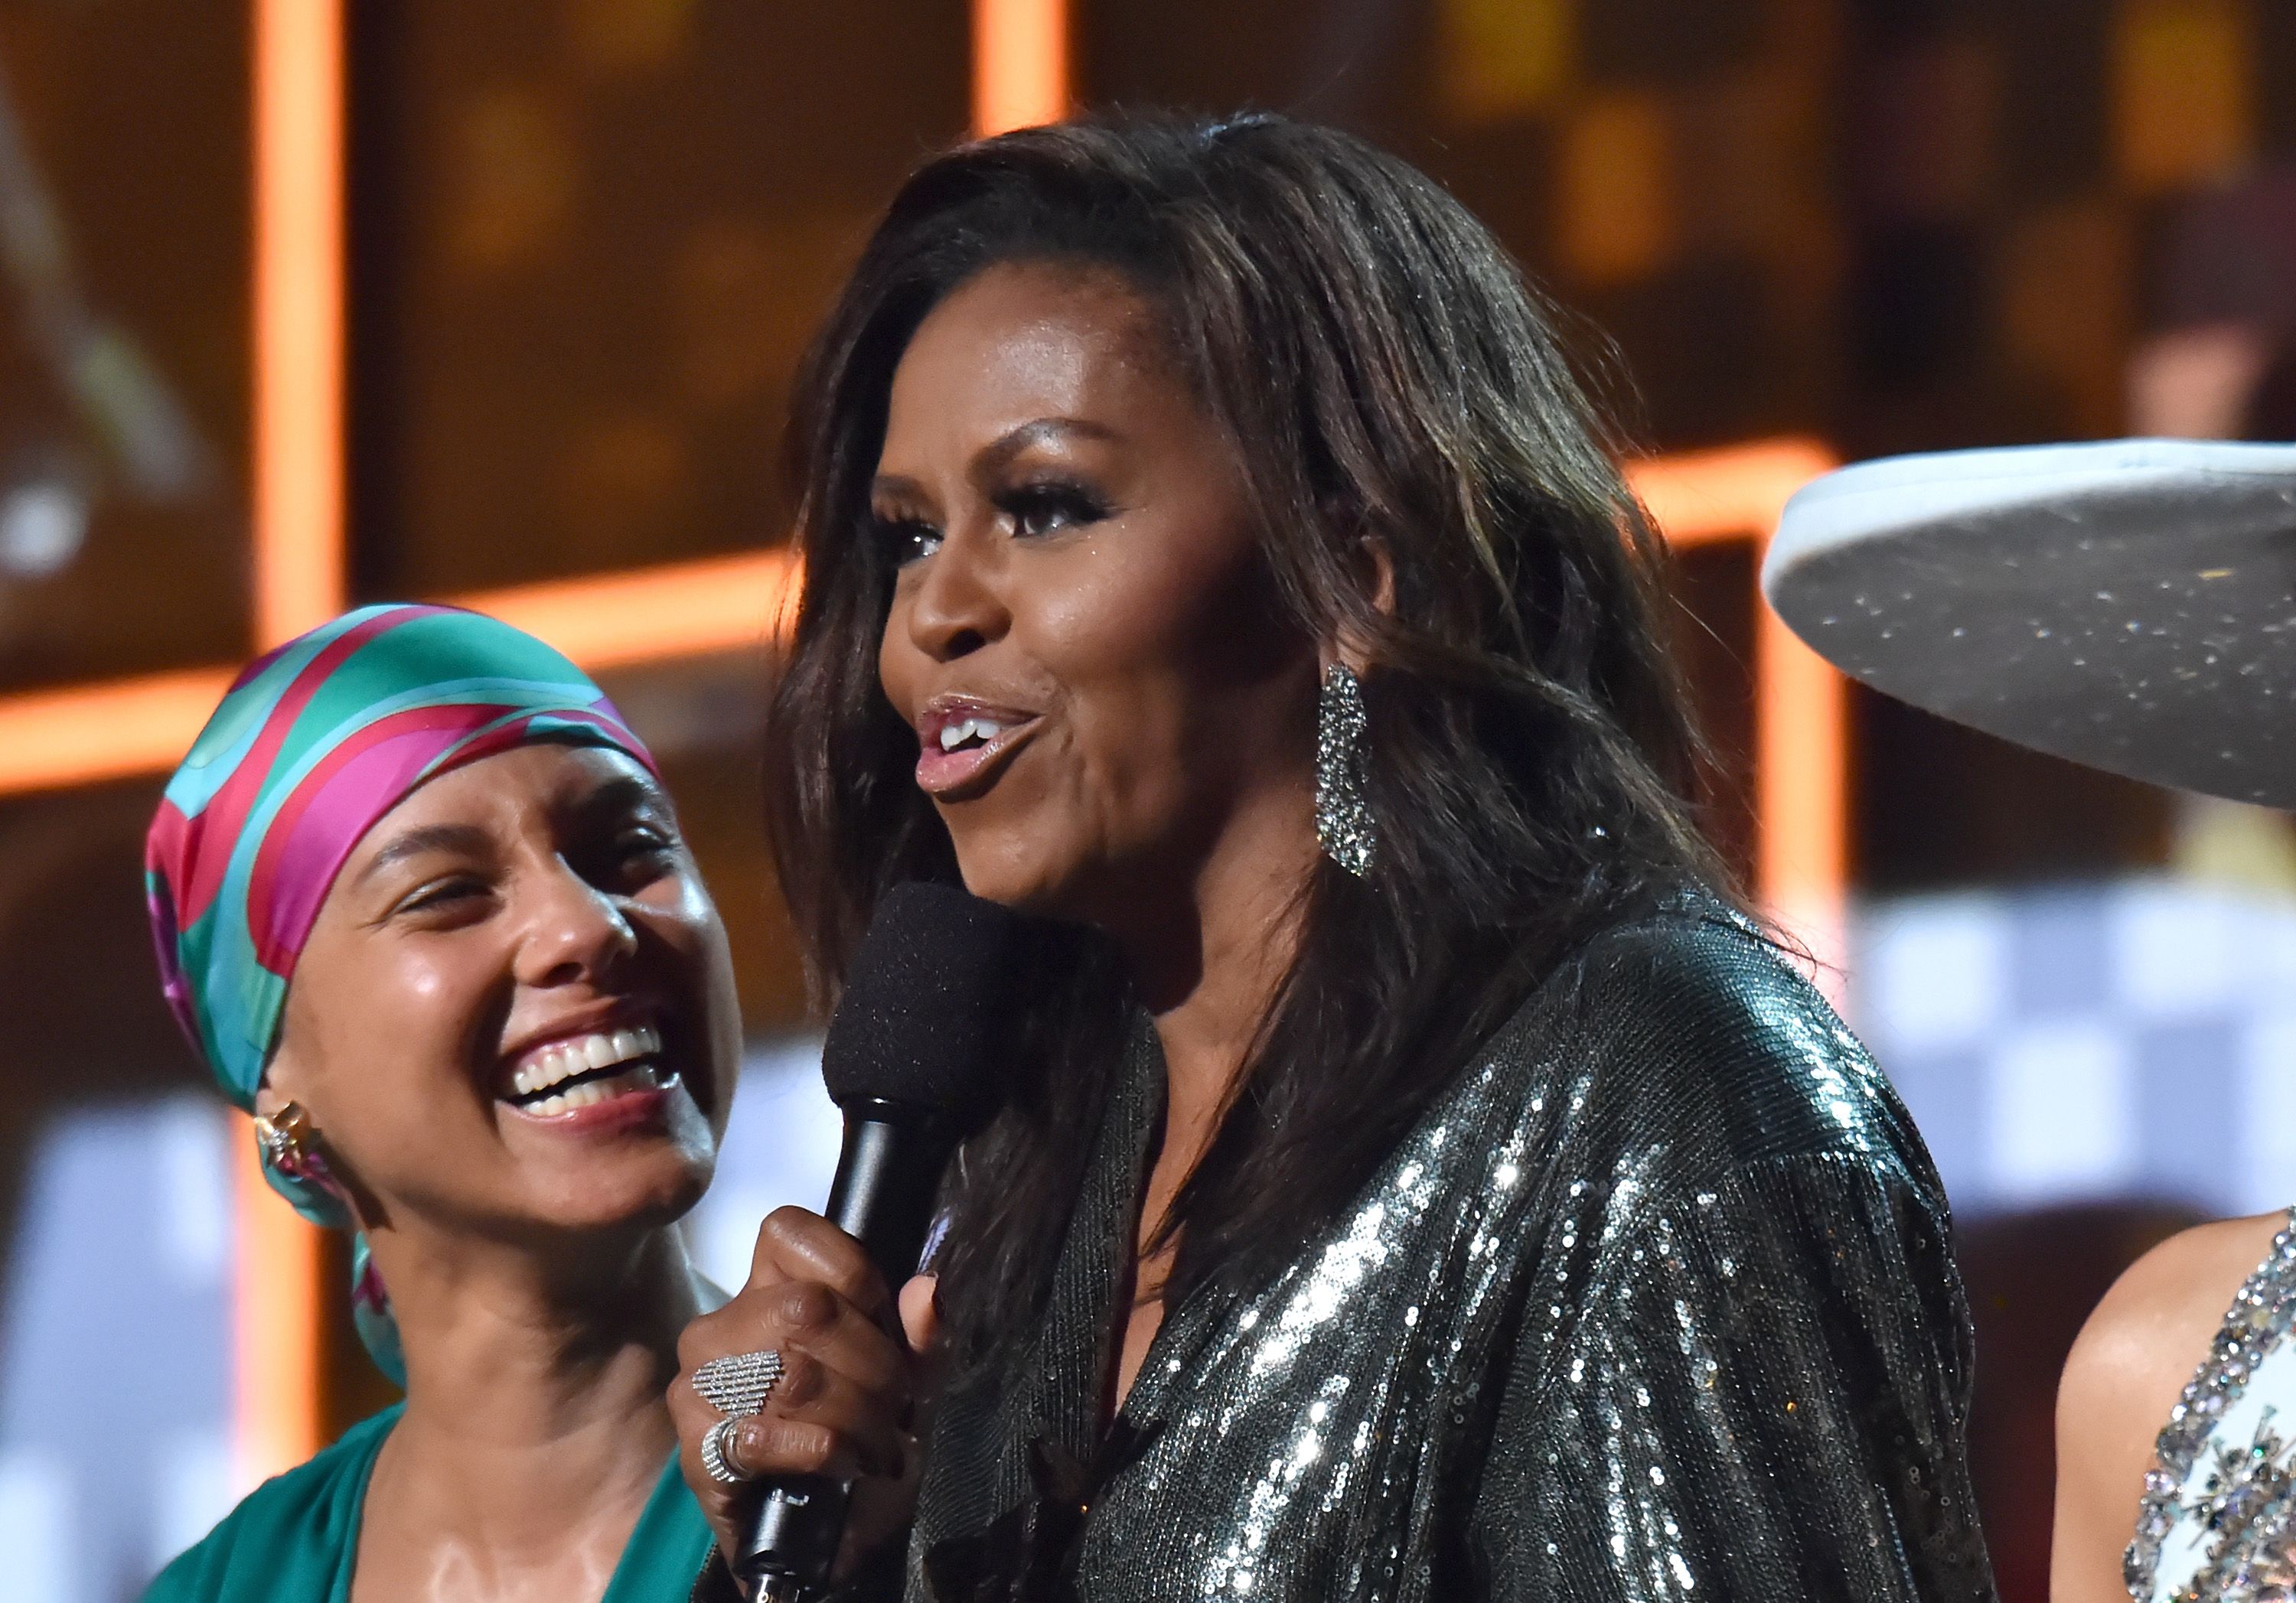 Singer Alicia Keys and Michelle Obama at the Grammy Awards on February 10, 2019 in Los Angeles. | Photo: Getty Images 